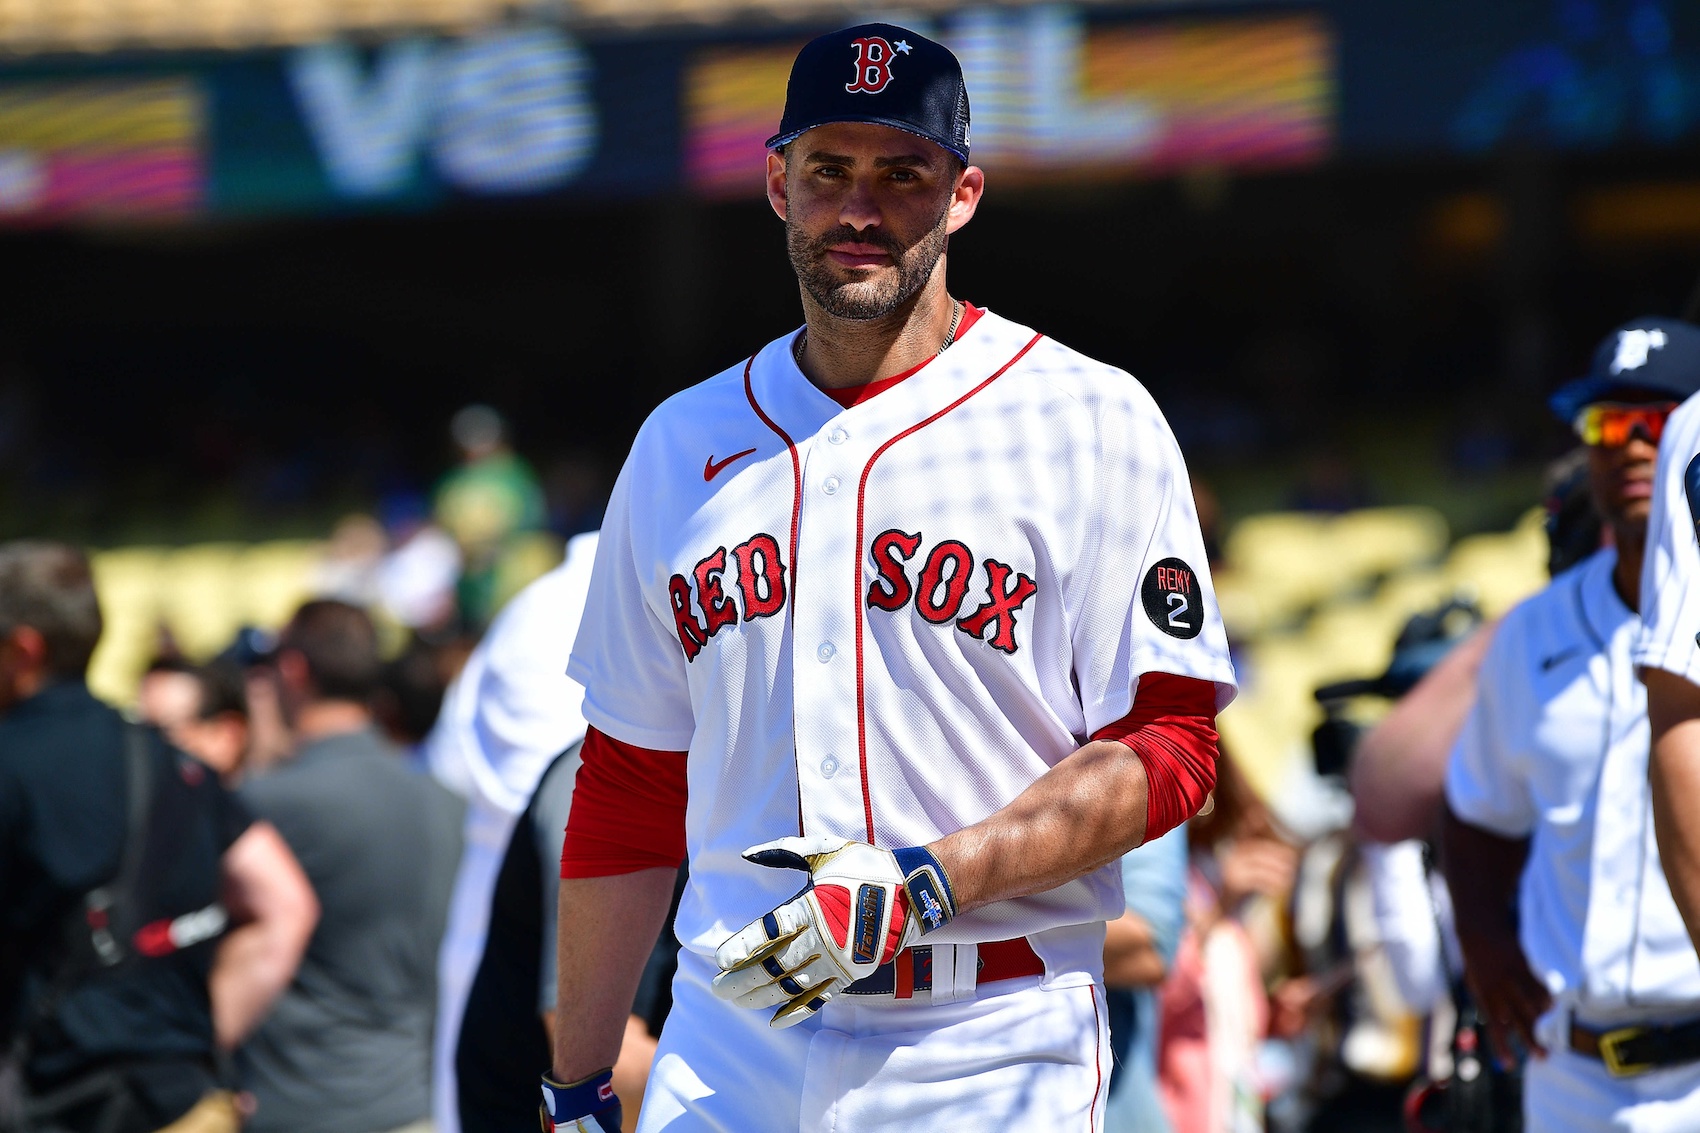 Jul 18, 2022; Los Angeles, CA, USA; American League designated hitter J.D. Martinez (28) of the Boston Red Sox during batting practice at Dodger Stadium. Mandatory Credit: Gary A. Vasquez/USA TODAY Sports